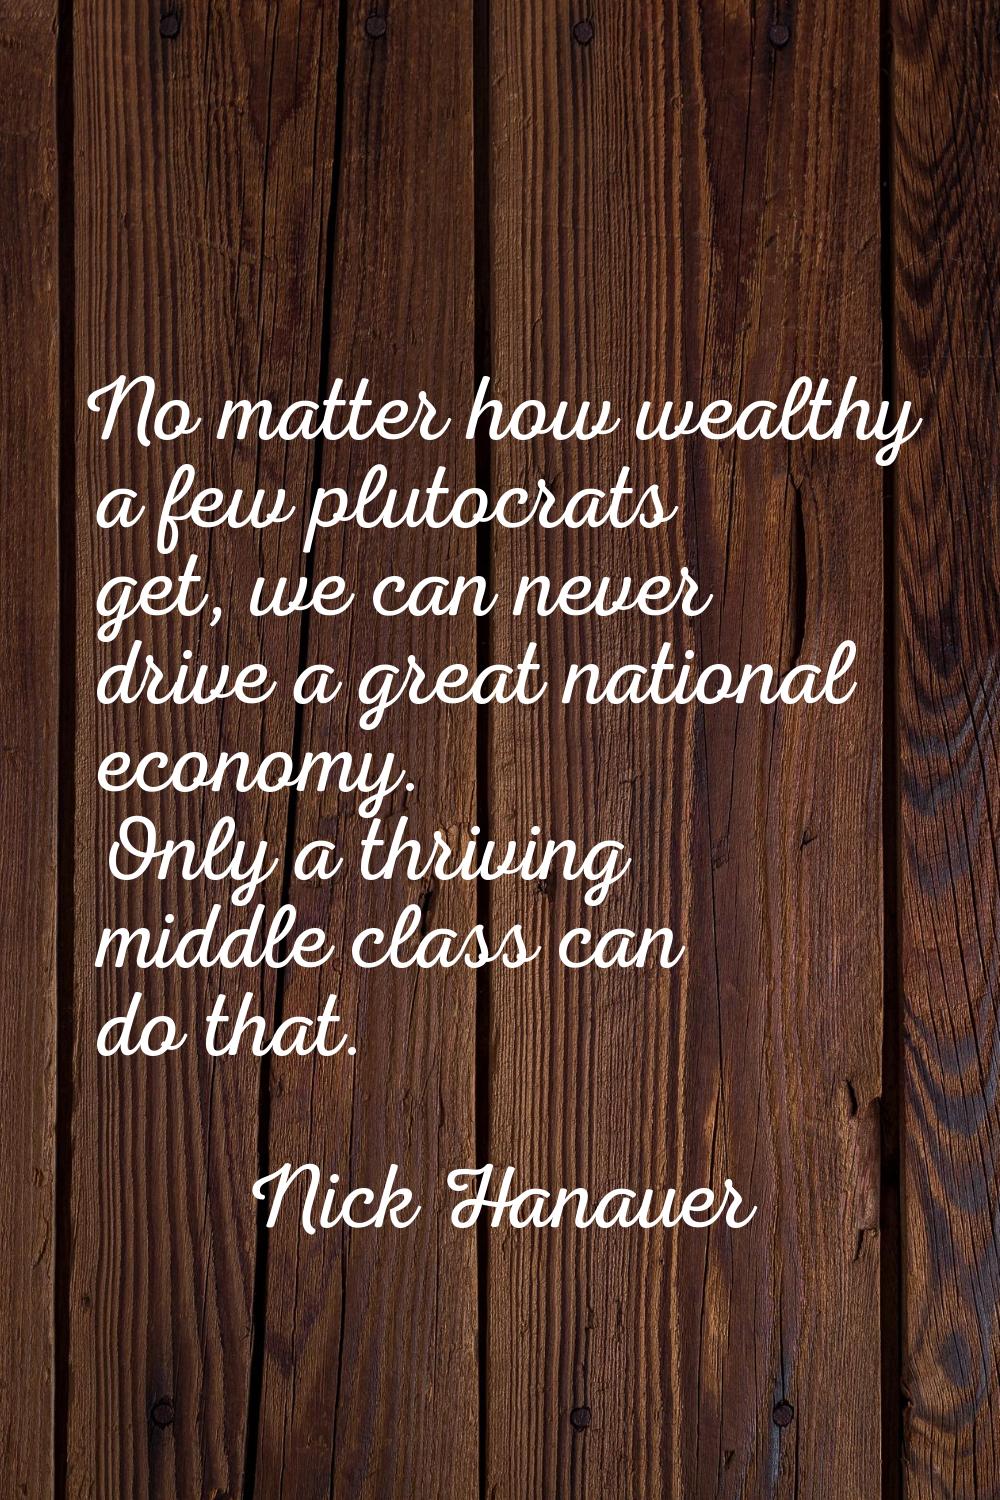 No matter how wealthy a few plutocrats get, we can never drive a great national economy. Only a thr